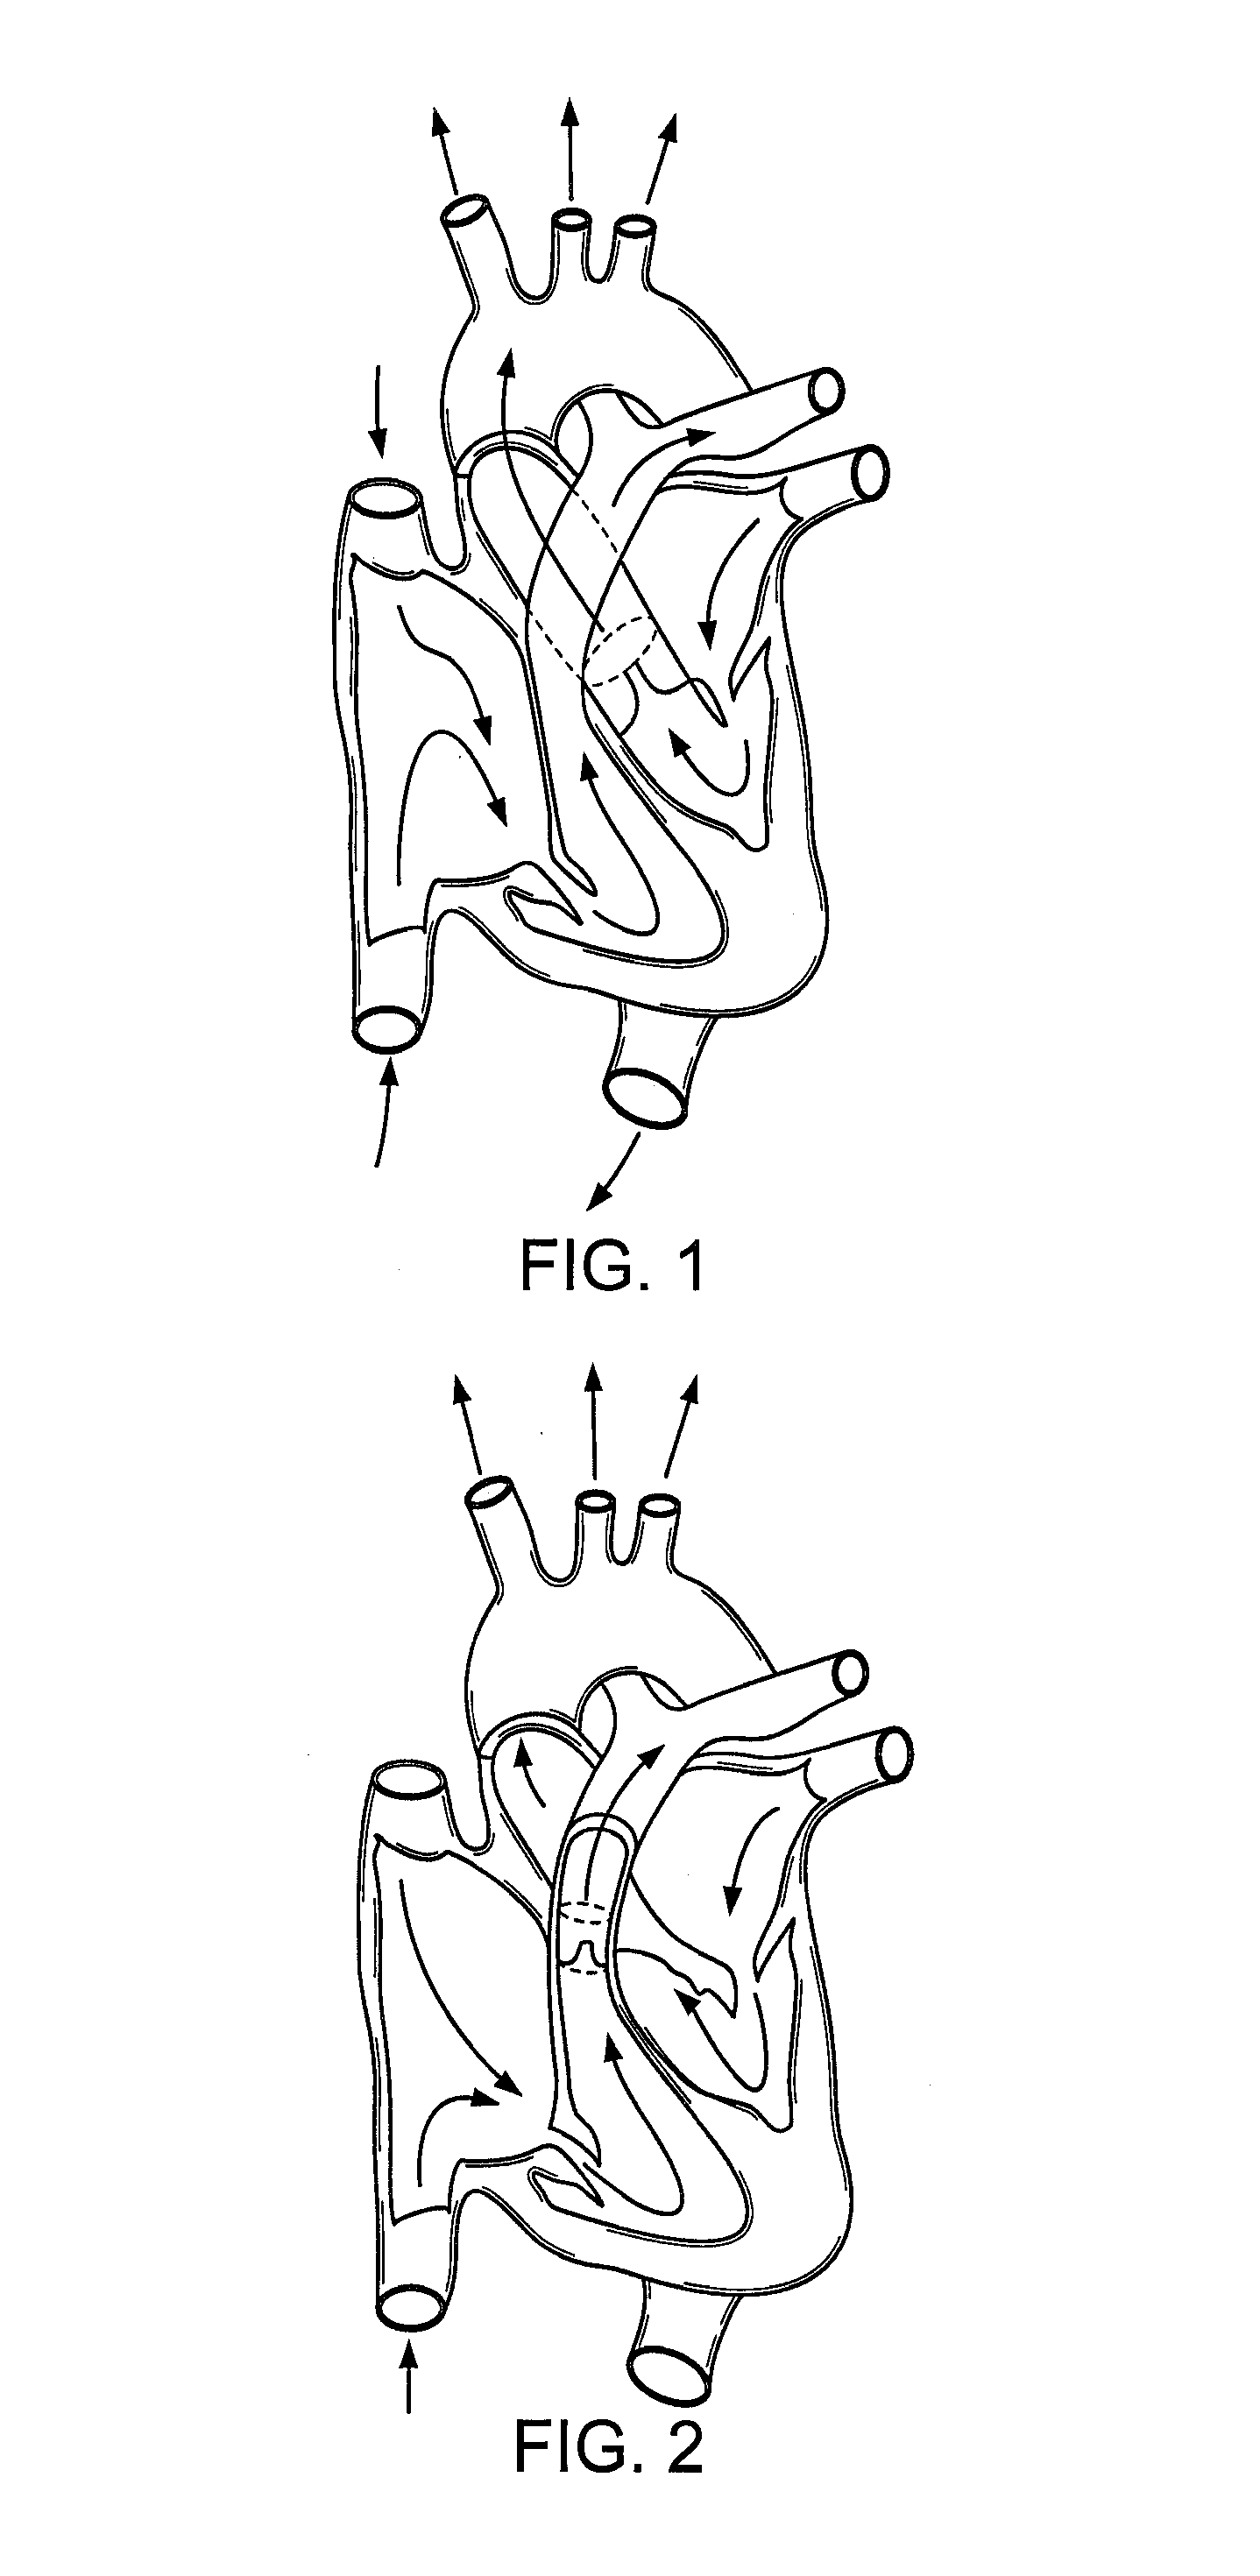 Involuted endovascular valve and method of construction